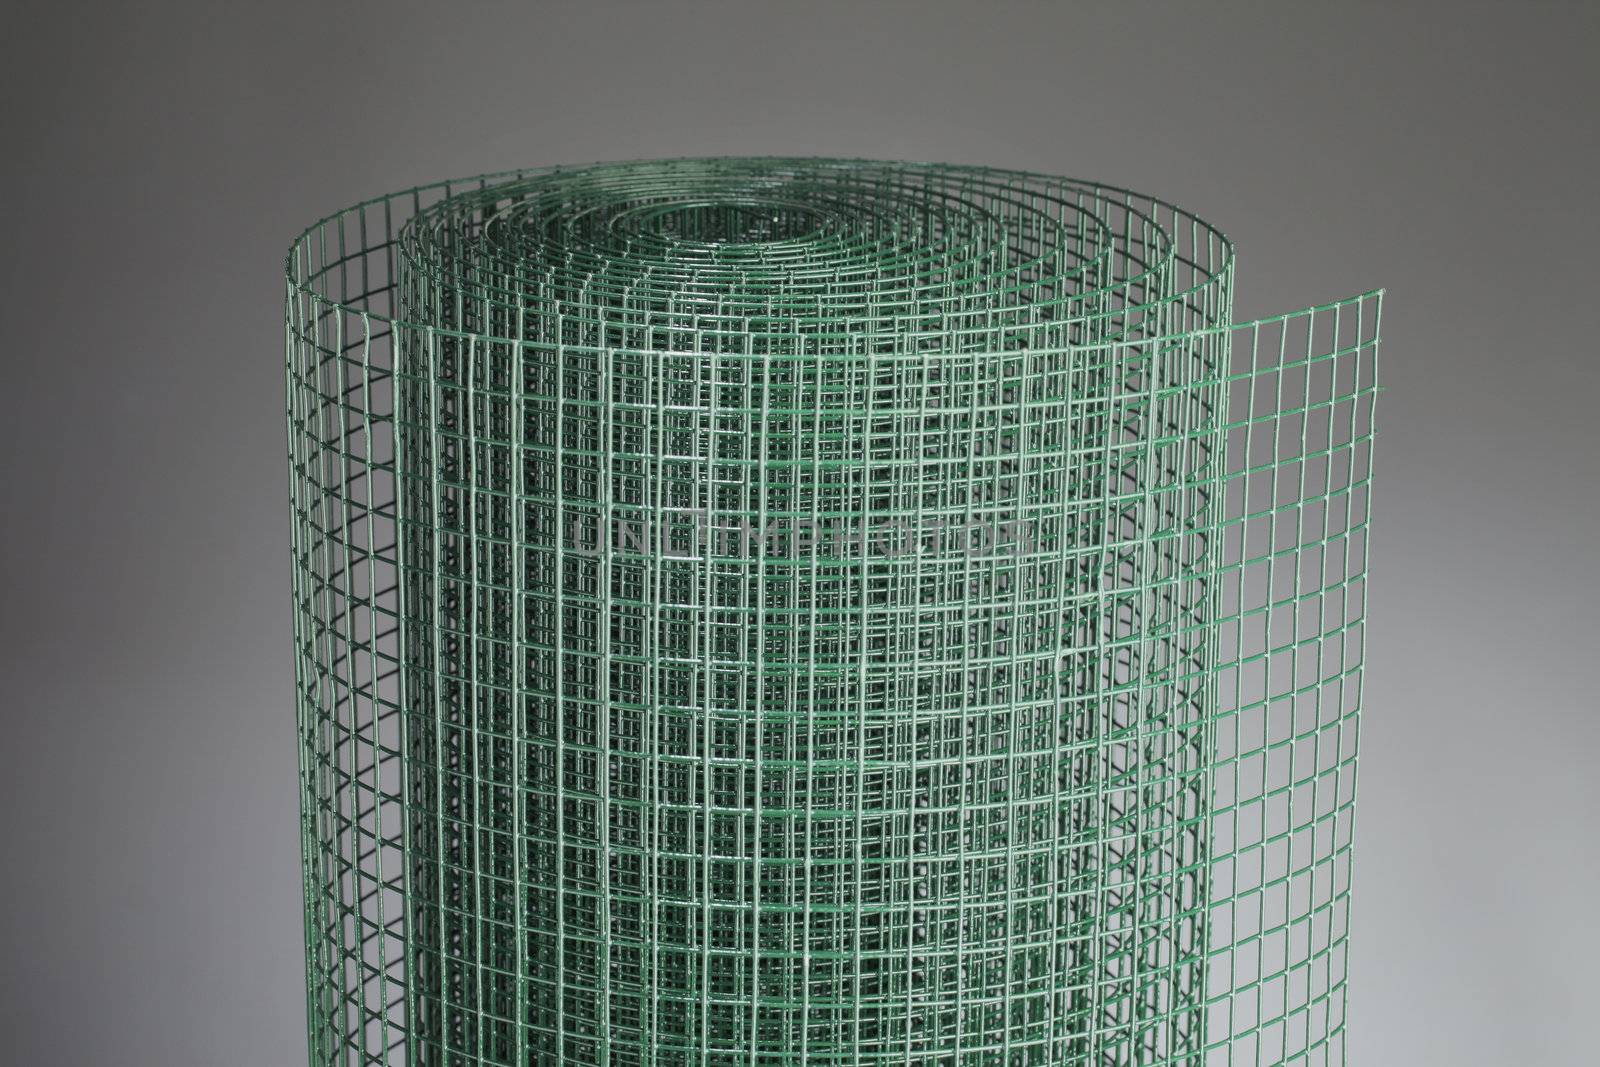 Wire mesh by Stocksnapper